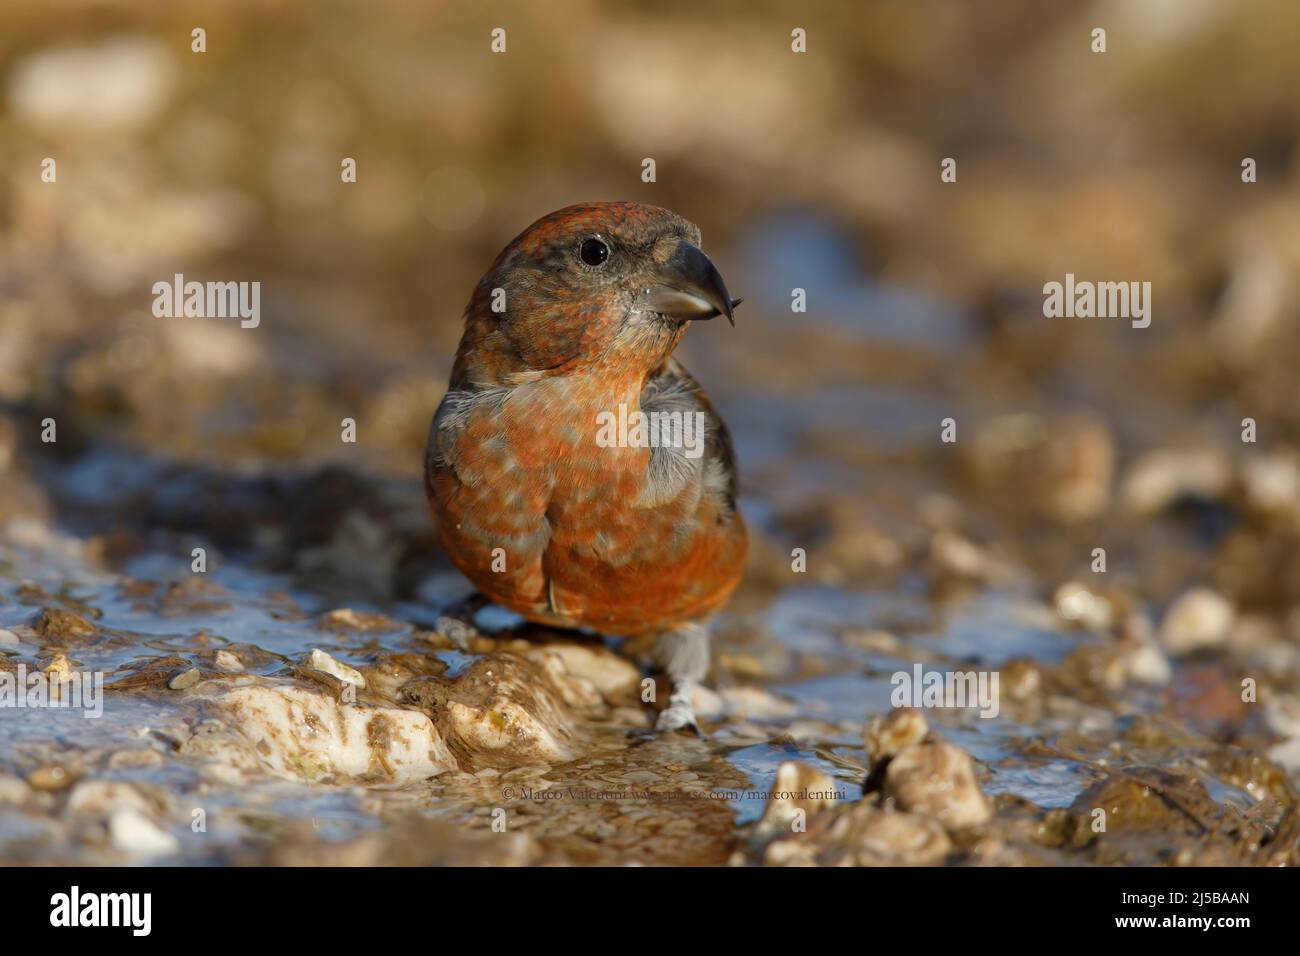 Red Crossbill, Pizzoli (AQ), Italy, August 2017 Stock Photo